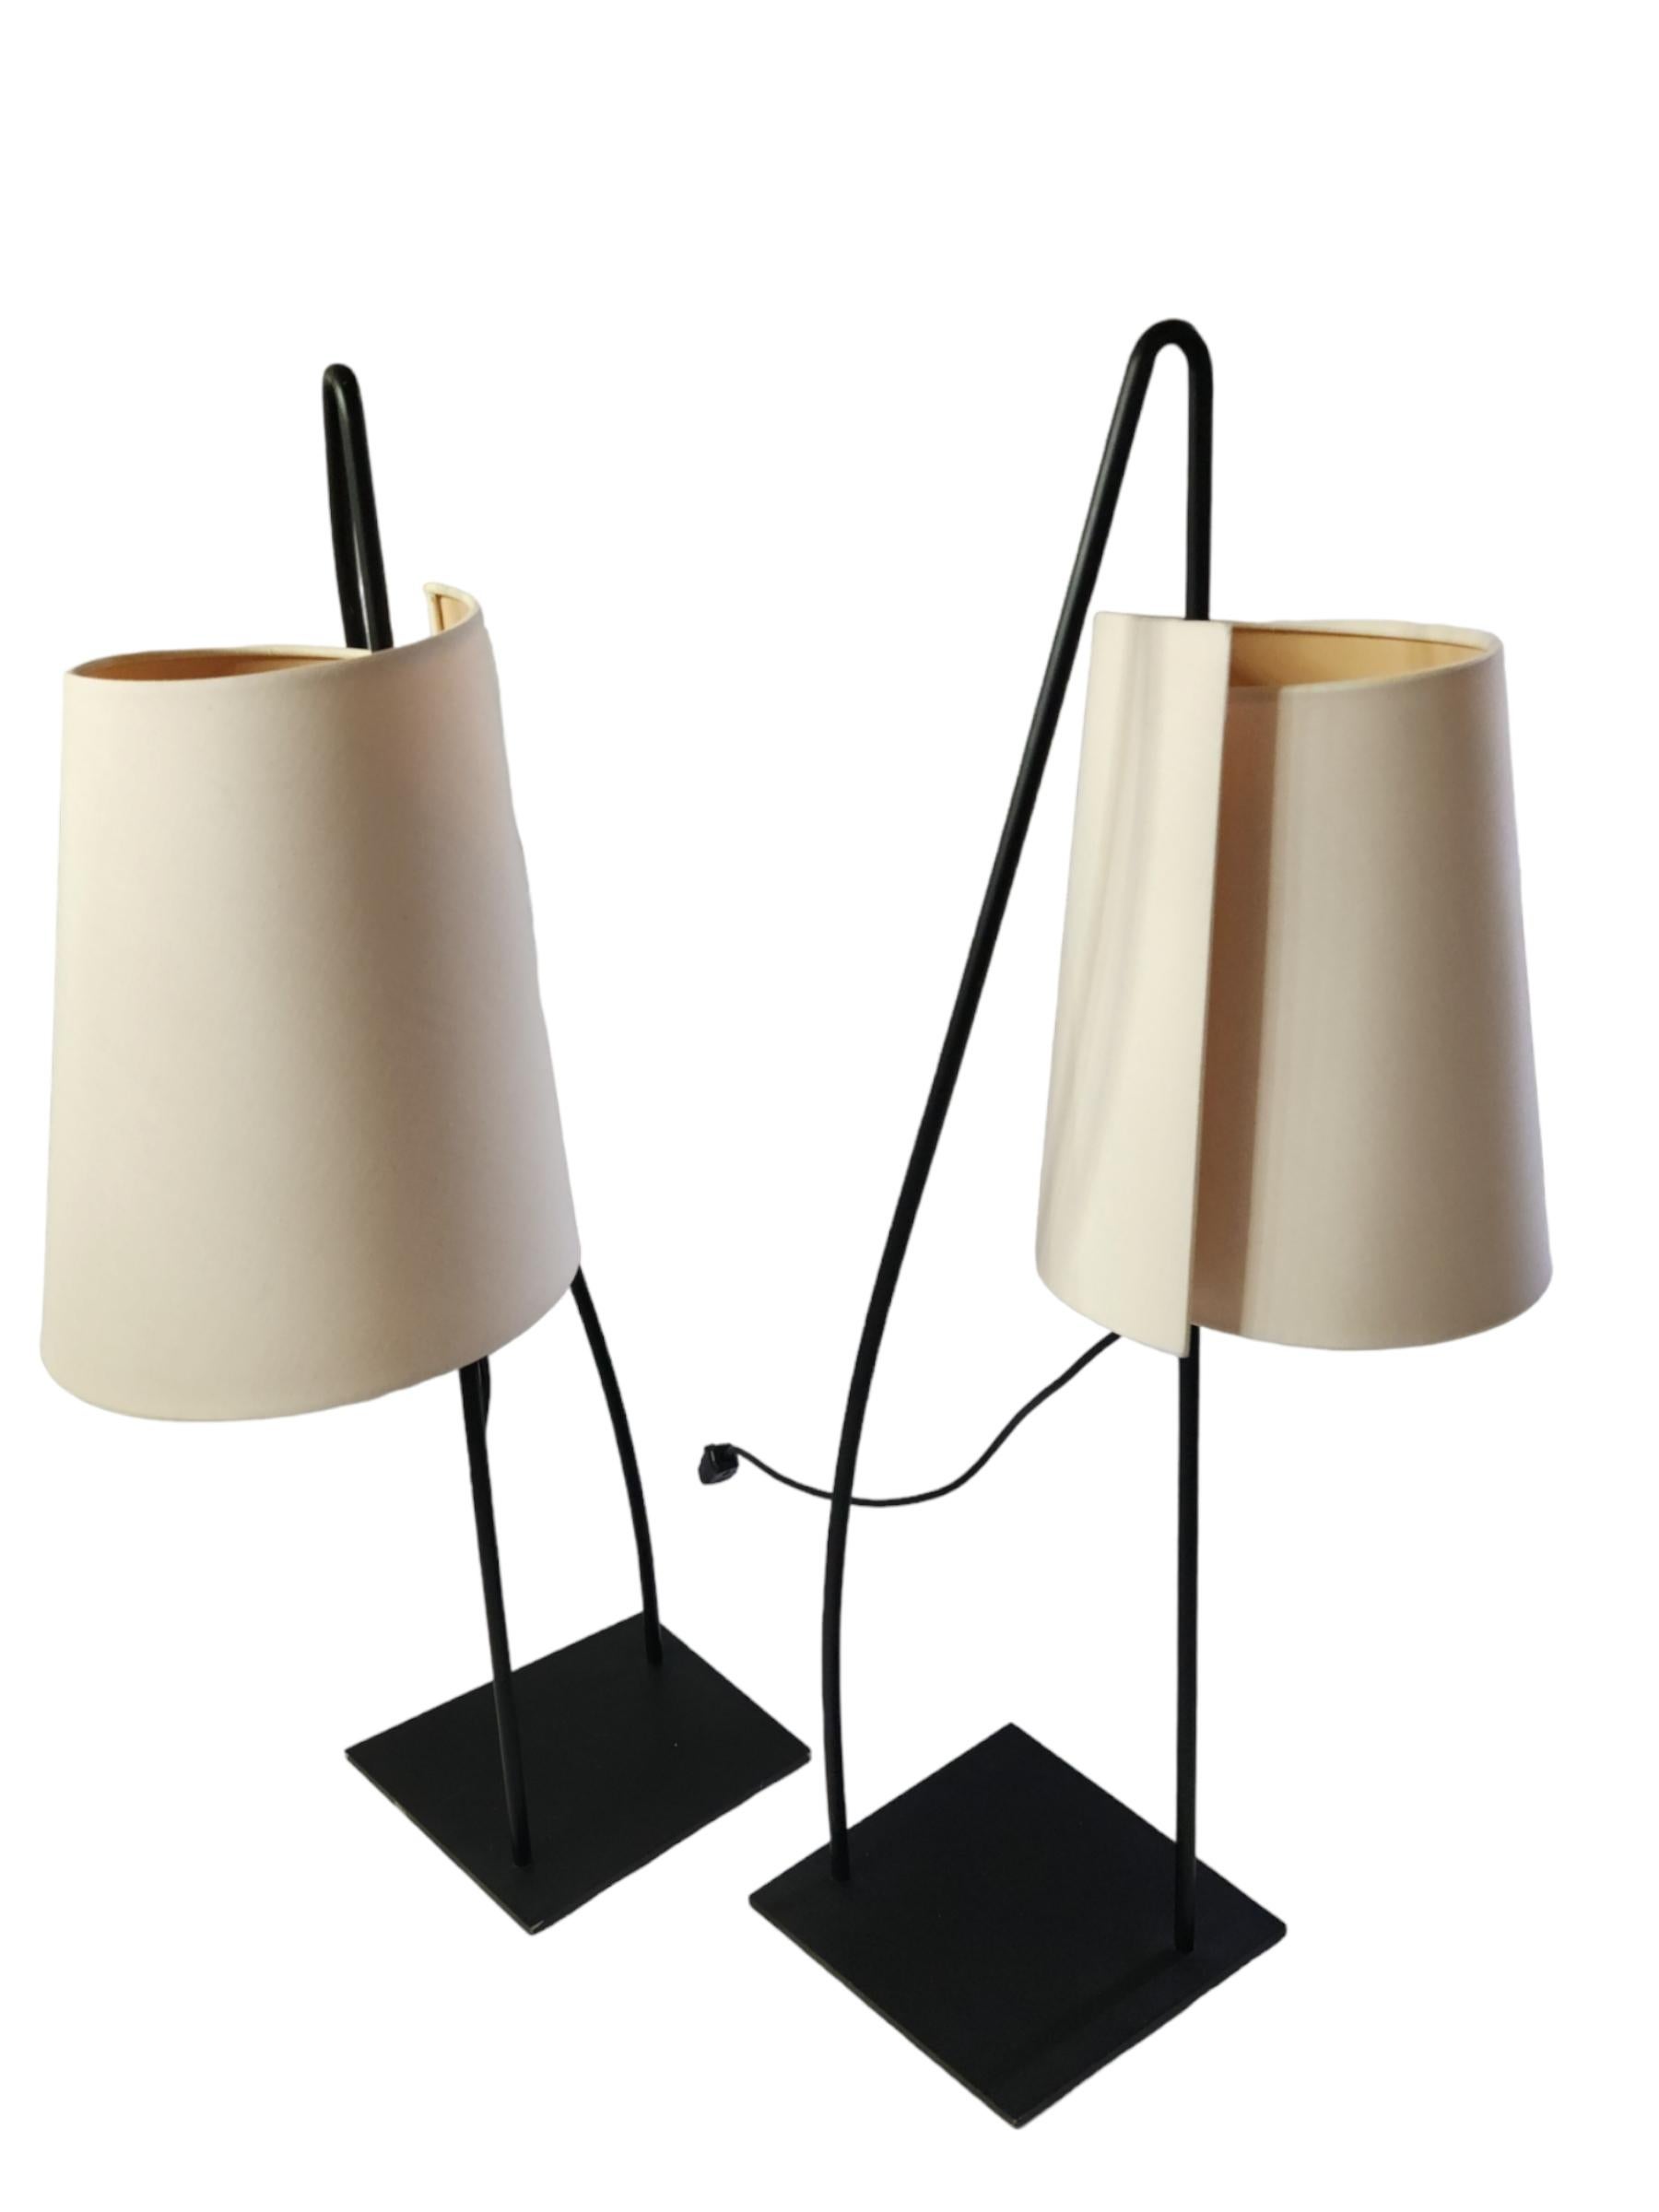 A pair of Italian sculptural table lamps by Italiana Luce manufactured in Italy, circa 1980s.
The black lacquered base plates are slightly trapezoid. and support a curved black lacquered metal loop.
The cast plastic sockets slides up and down and